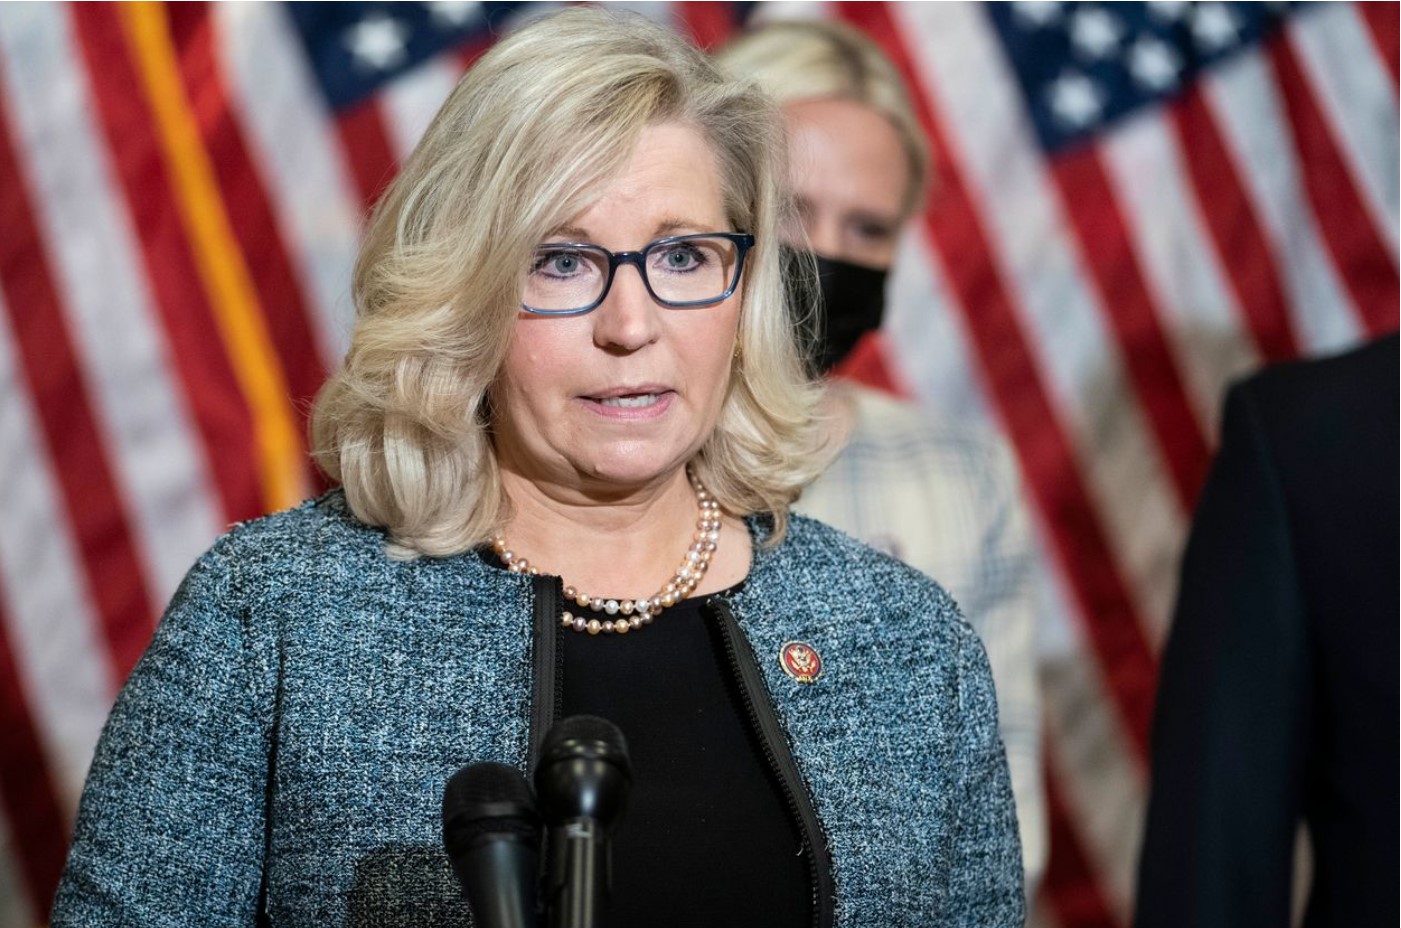 Liz Cheney Out as Leader in House Republican